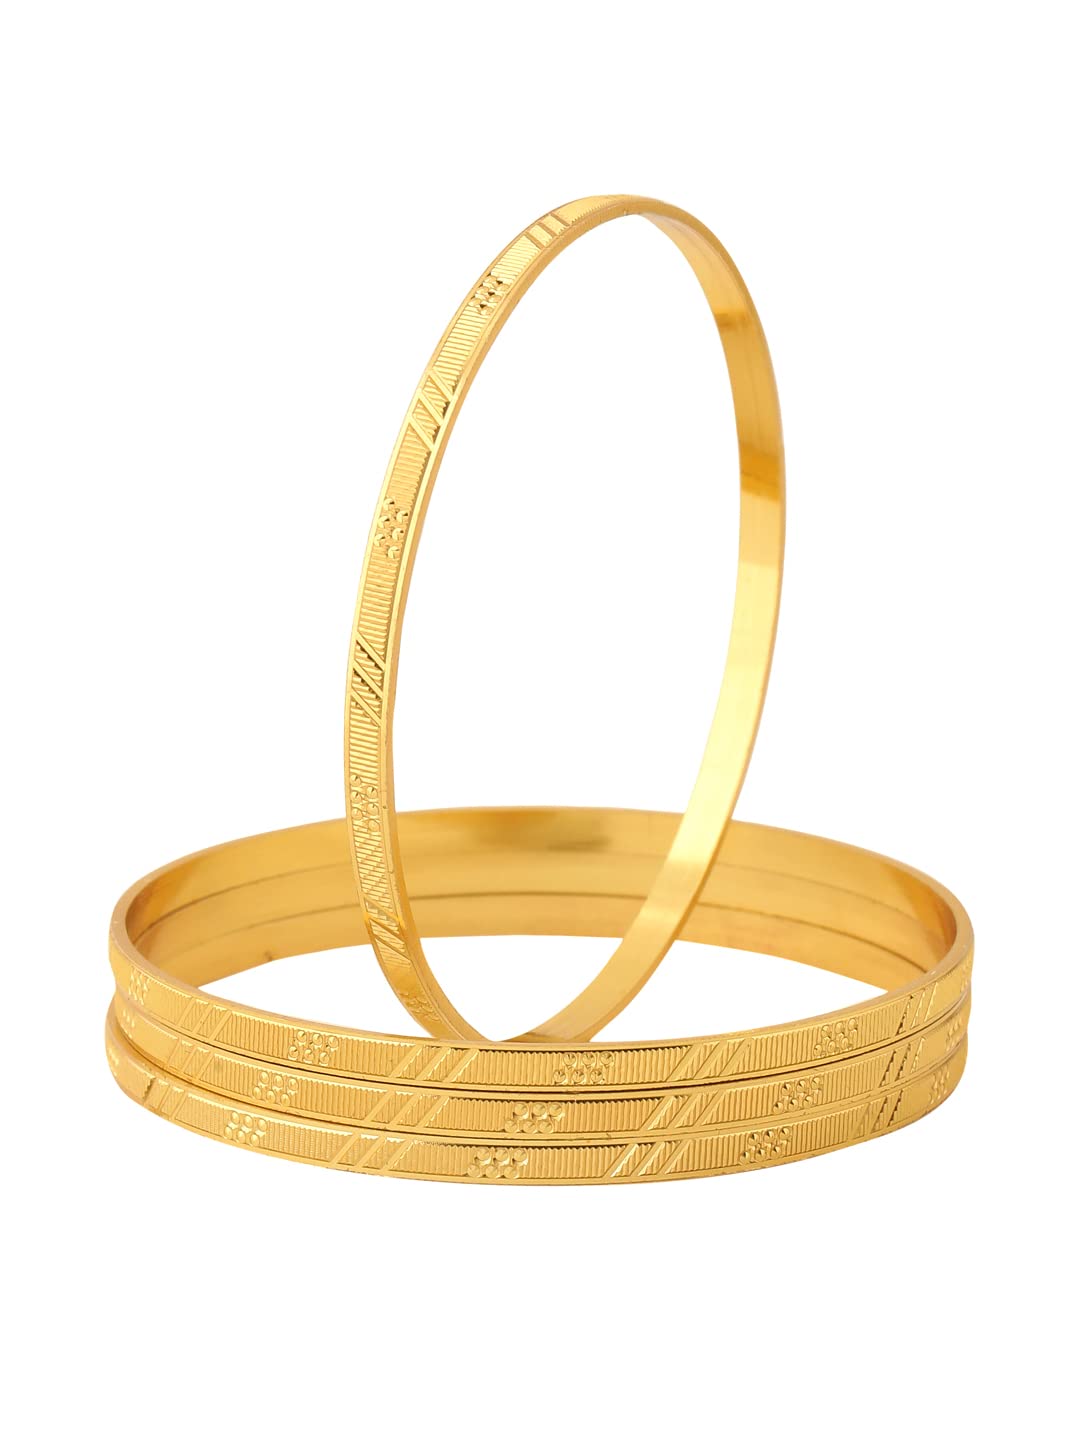 Yellow Chimes Bangles for Women Gold Toned Set of 4 Pcs Dialy Wear Bangles for Women and Girls